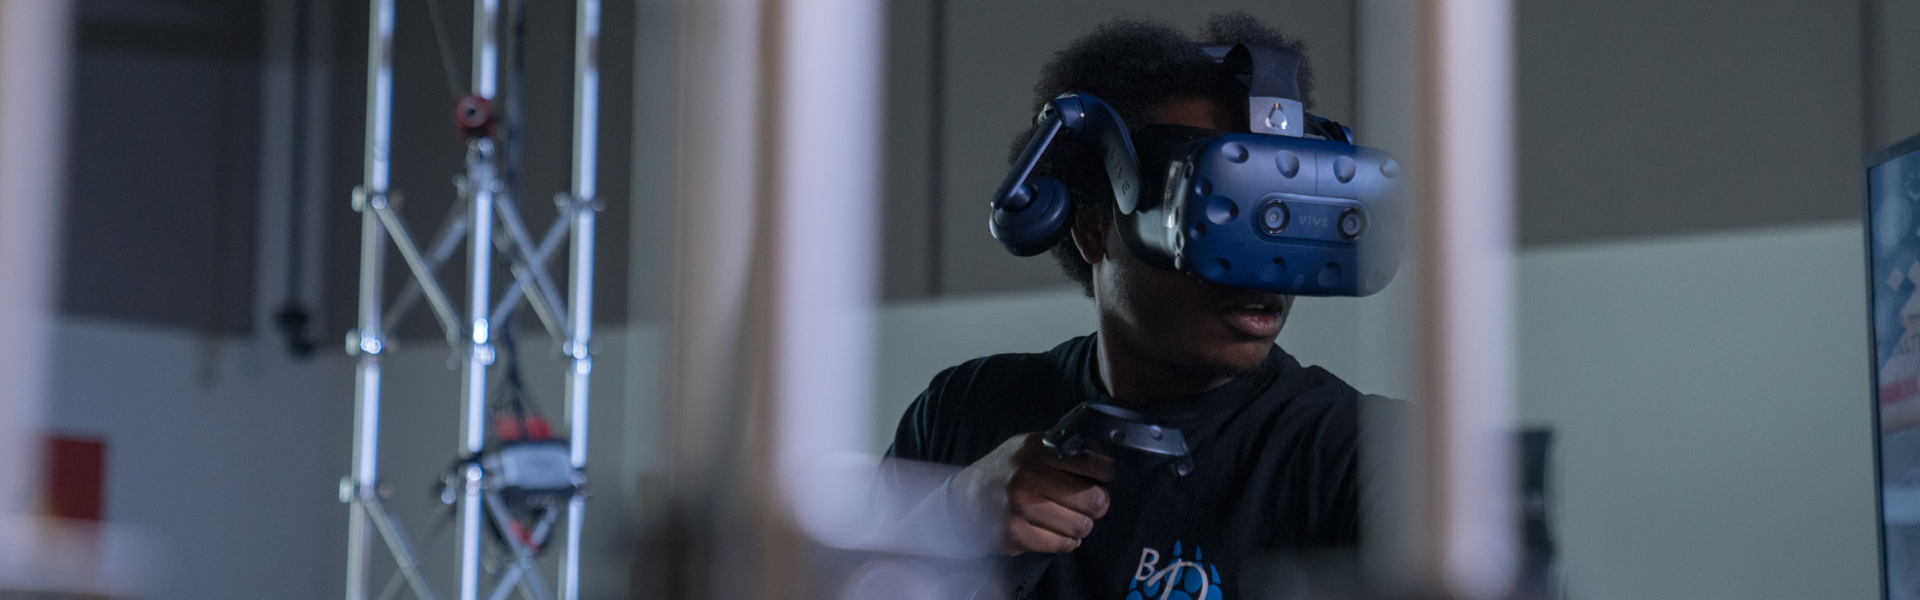 Student using VR gear in game development lab